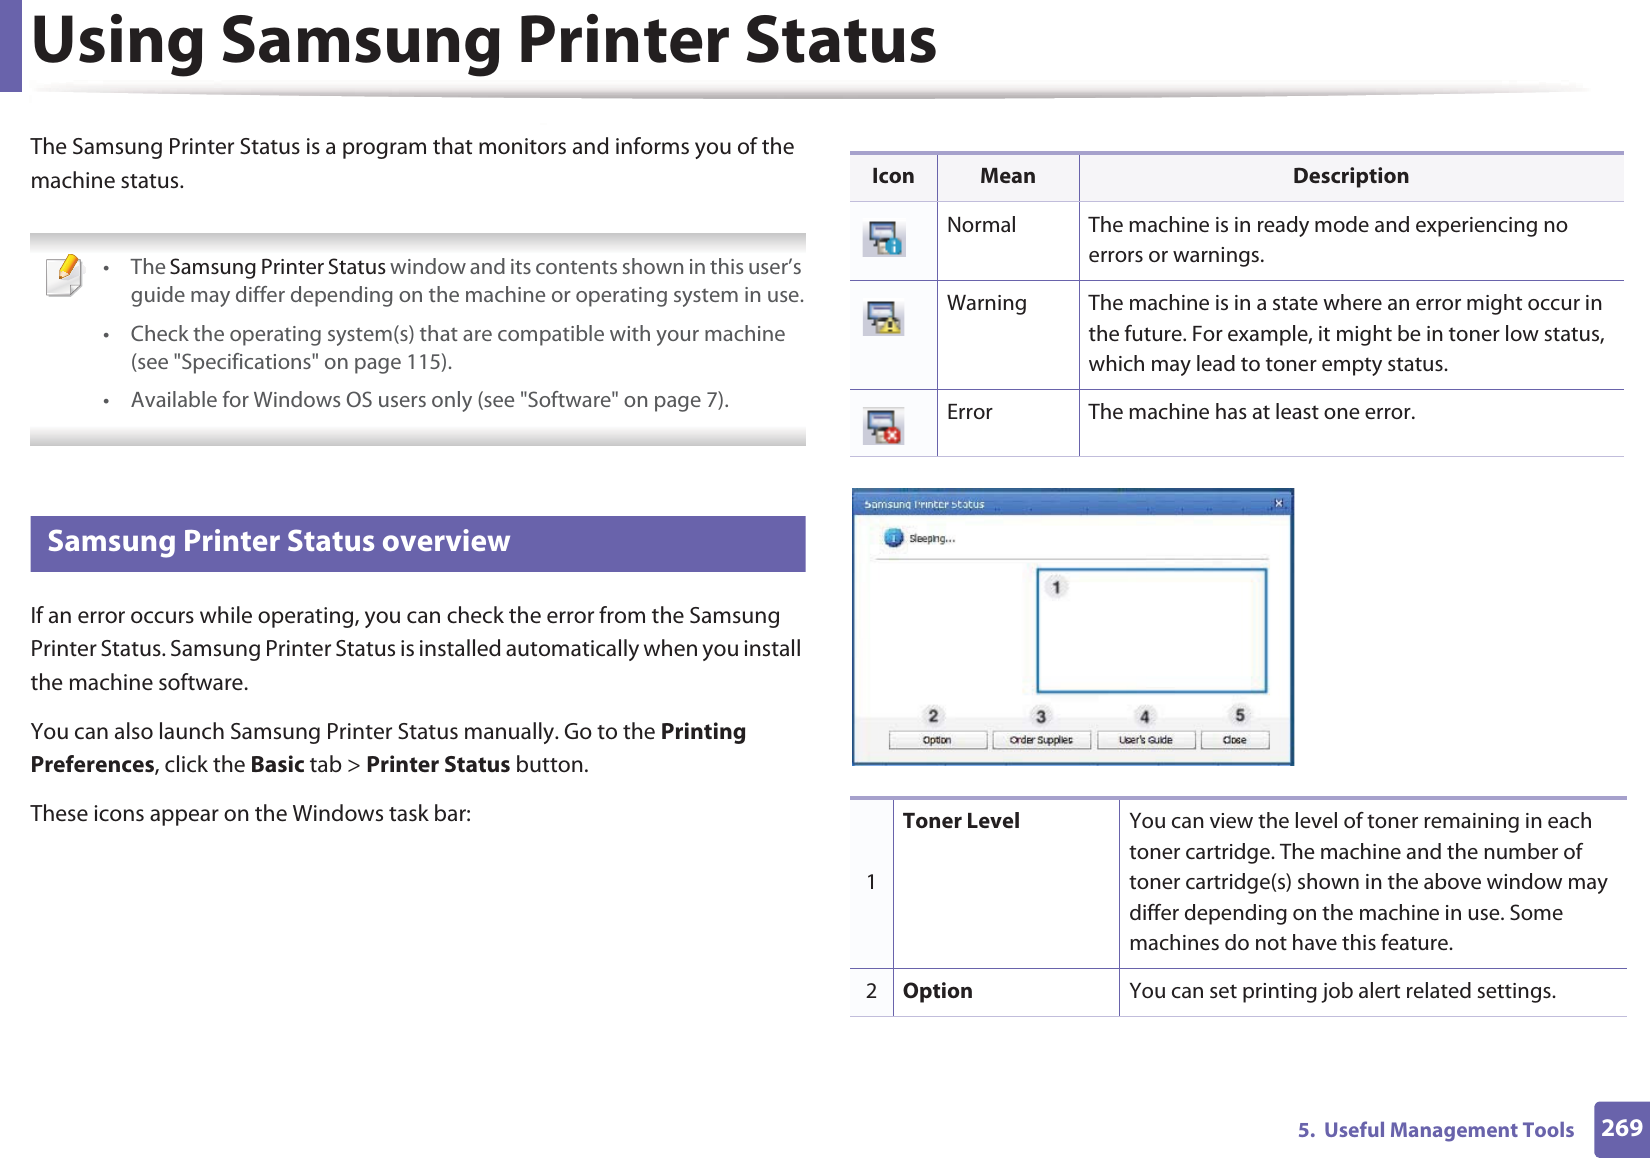 2695.  Useful Management ToolsUsing Samsung Printer Status The Samsung Printer Status is a program that monitors and informs you of the machine status.  • The Samsung Printer Status window and its contents shown in this user’s guide may differ depending on the machine or operating system in use.• Check the operating system(s) that are compatible with your machine (see &quot;Specifications&quot; on page 115).• Available for Windows OS users only (see &quot;Software&quot; on page 7). 9 Samsung Printer Status overviewIf an error occurs while operating, you can check the error from the Samsung Printer Status. Samsung Printer Status is installed automatically when you install the machine software. You can also launch Samsung Printer Status manually. Go to the Printing Preferences, click the Basic tab &gt; Printer Status button.These icons appear on the Windows task bar:Icon Mean DescriptionNormal The machine is in ready mode and experiencing no errors or warnings.Warning The machine is in a state where an error might occur in the future. For example, it might be in toner low status, which may lead to toner empty status. Error The machine has at least one error.1Toner Level You can view the level of toner remaining in each toner cartridge. The machine and the number of toner cartridge(s) shown in the above window may differ depending on the machine in use. Some machines do not have this feature.2Option You can set printing job alert related settings. 